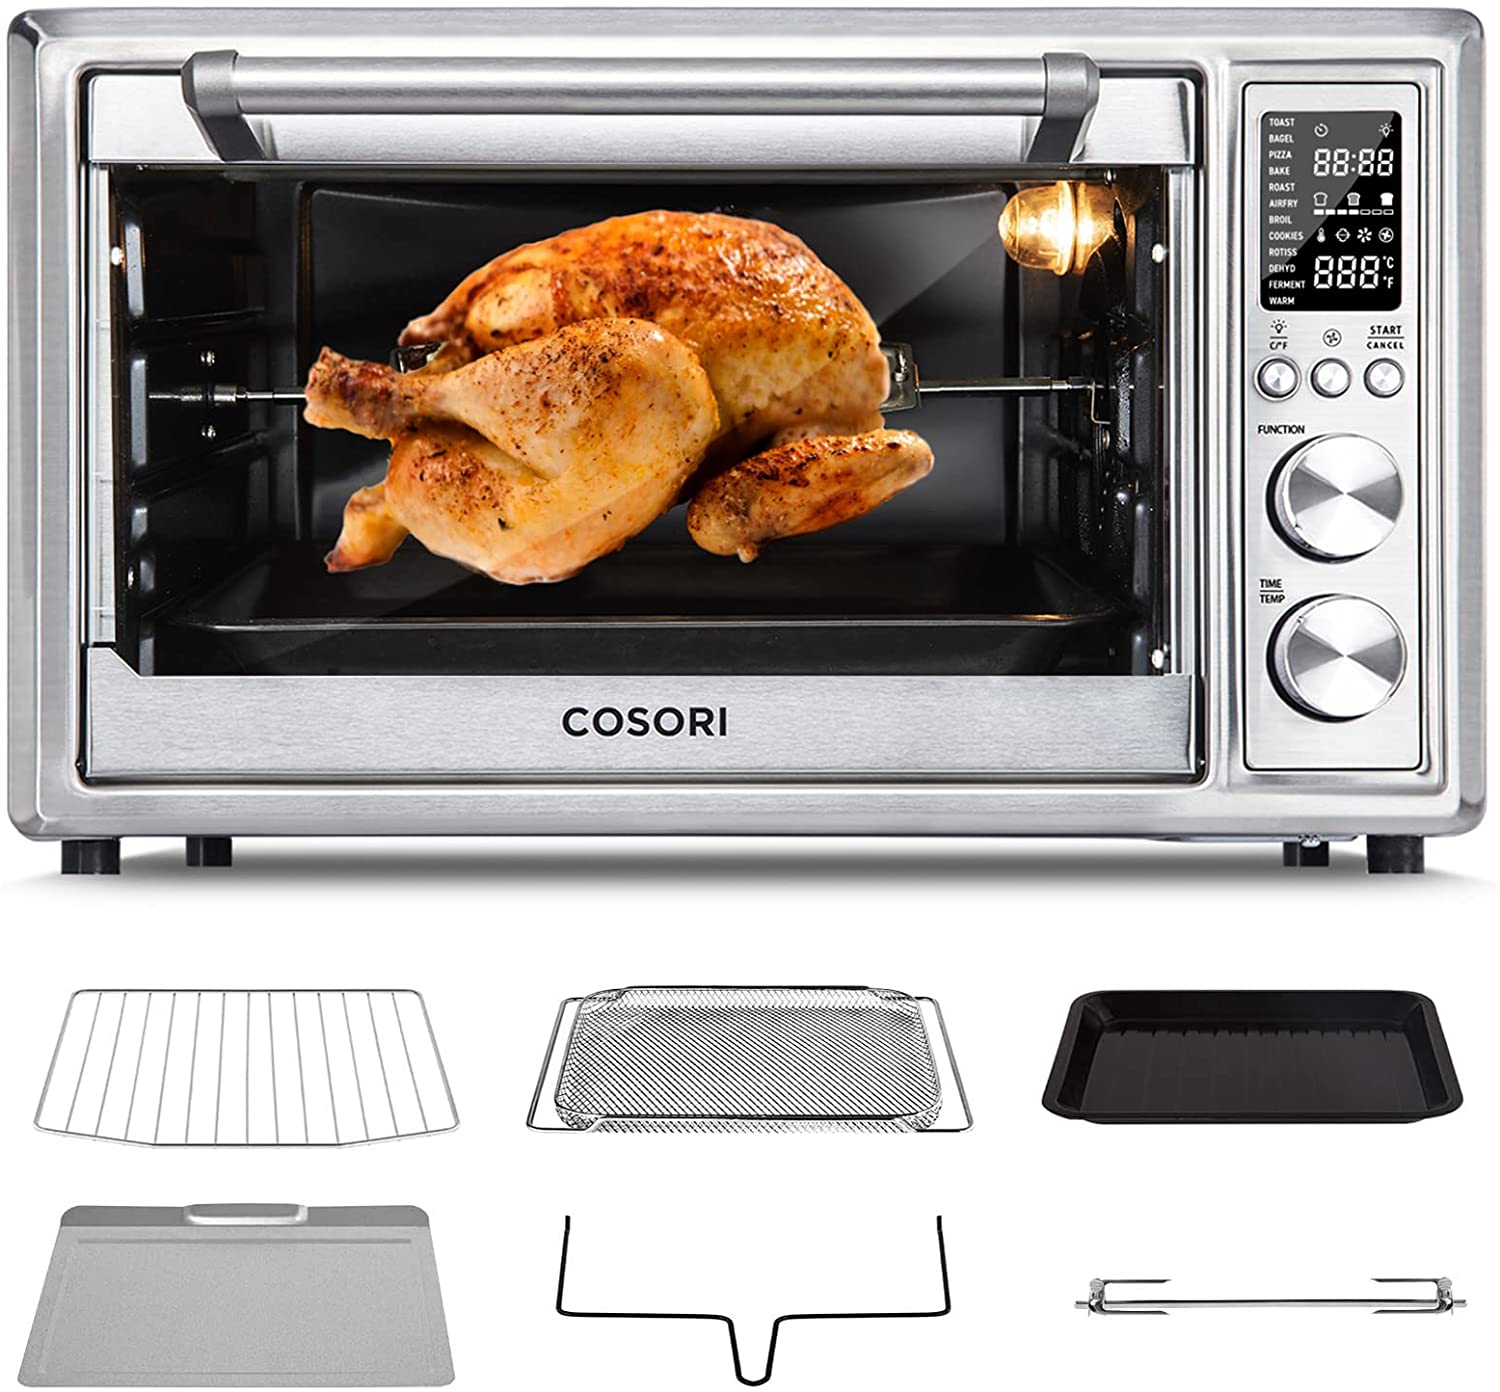 COSORI LED Interior Light Convection Toaster Oven